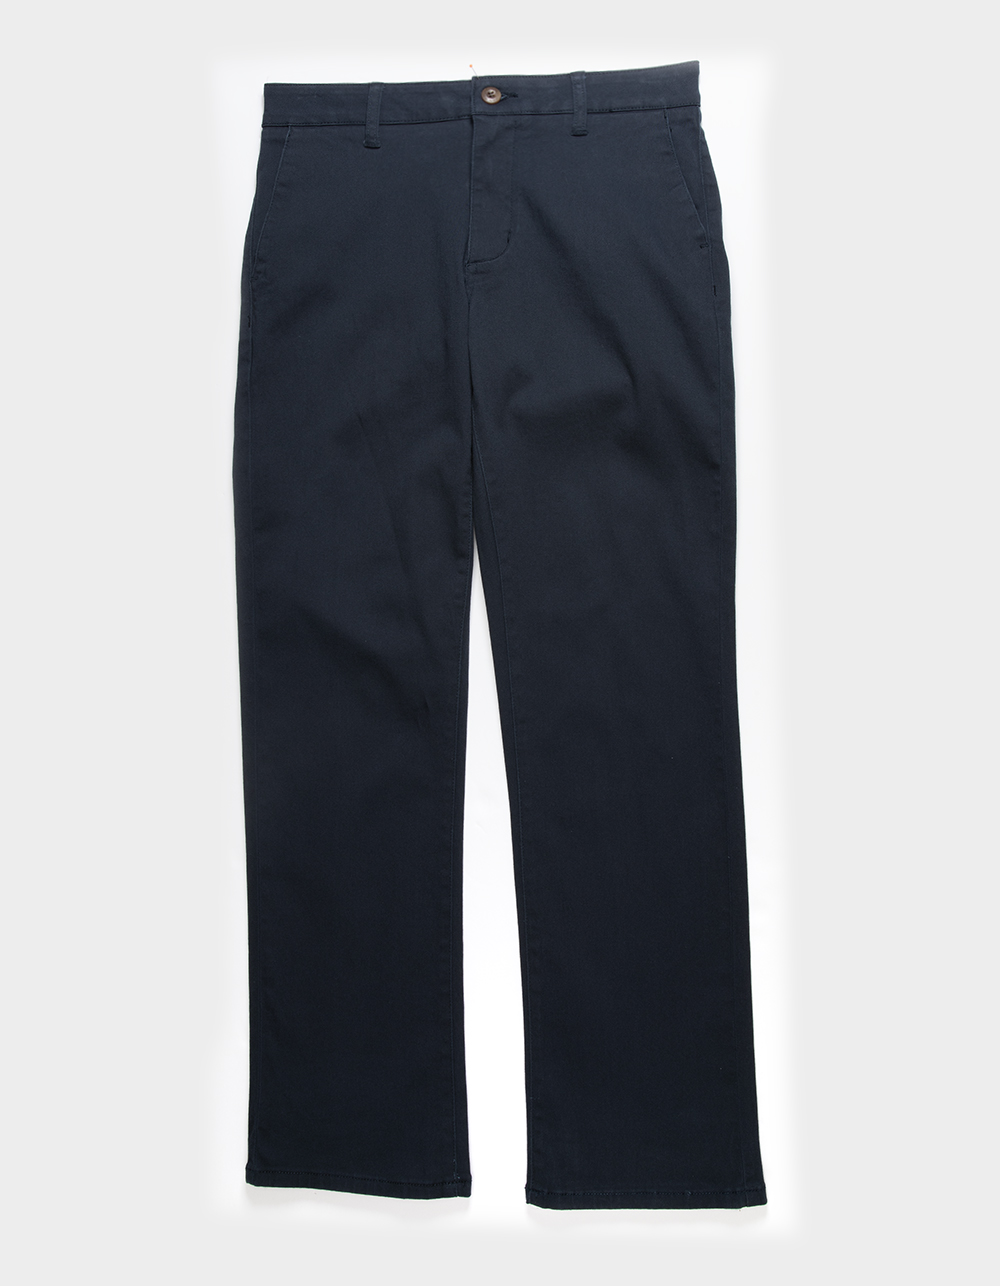 RSQ Mens Straight Chino Pants - MIDNIGHT BLUE | Tillys